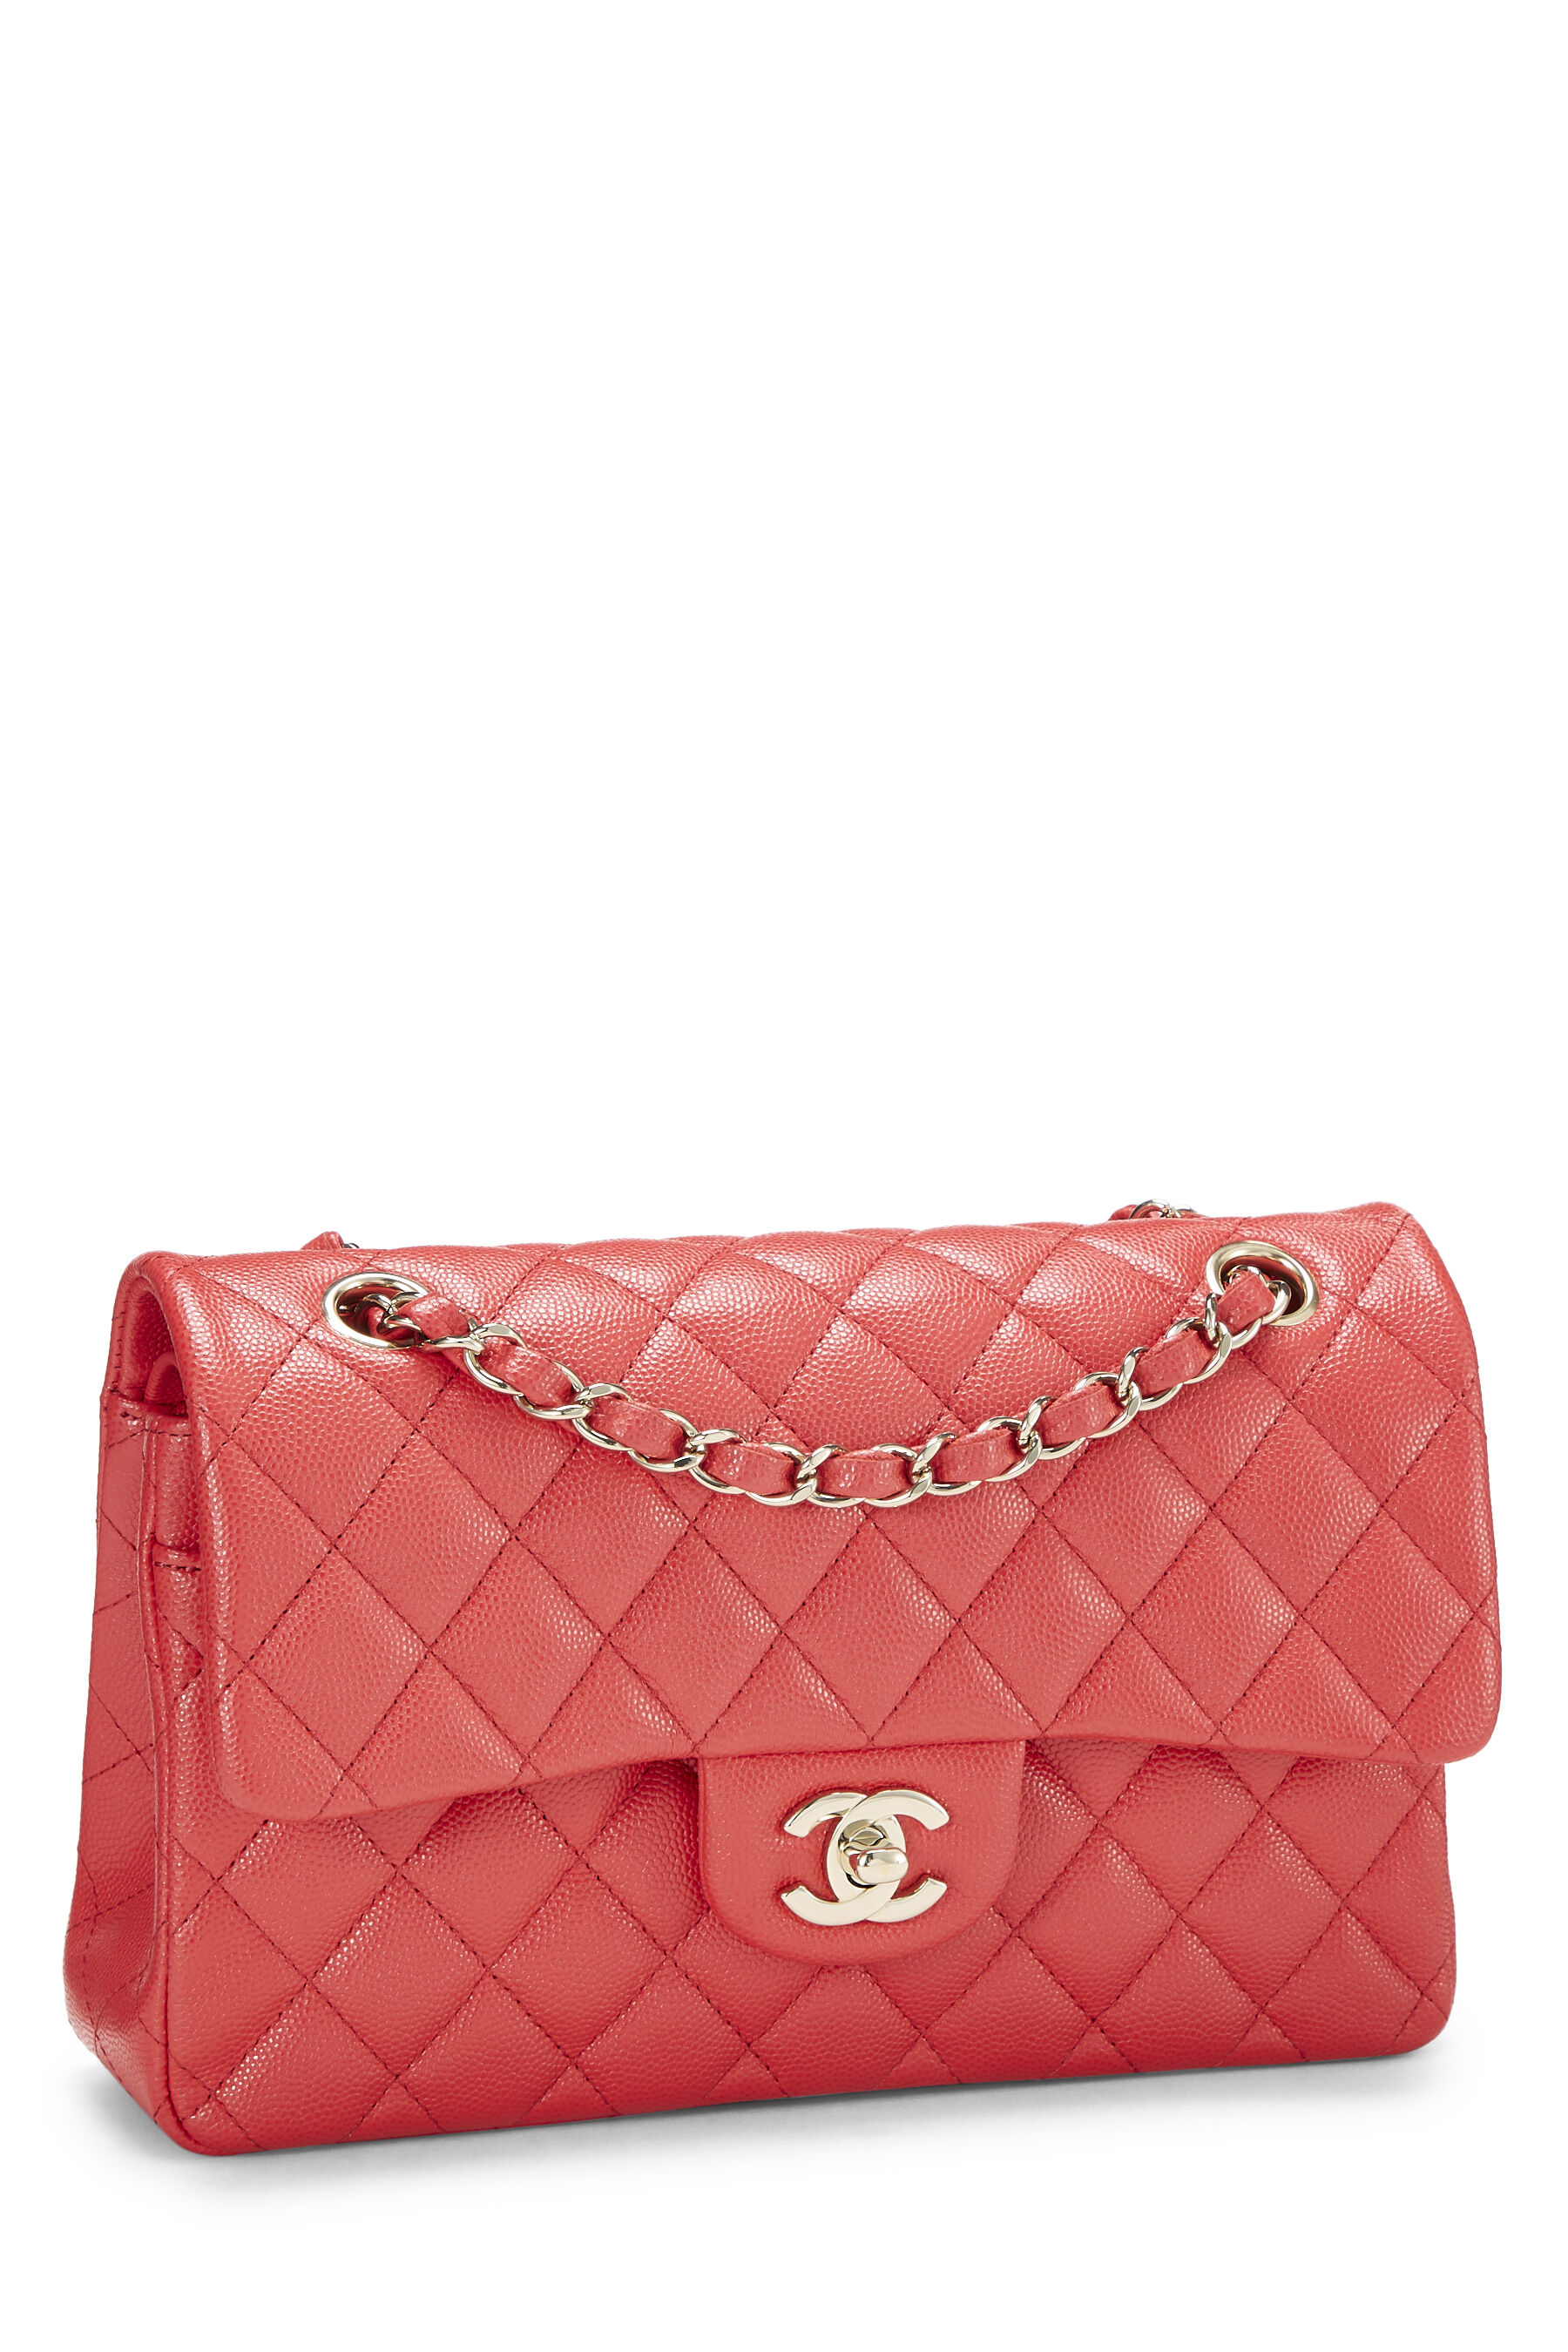 Chanel - Red Quilted Caviar Classic Double Flap Small